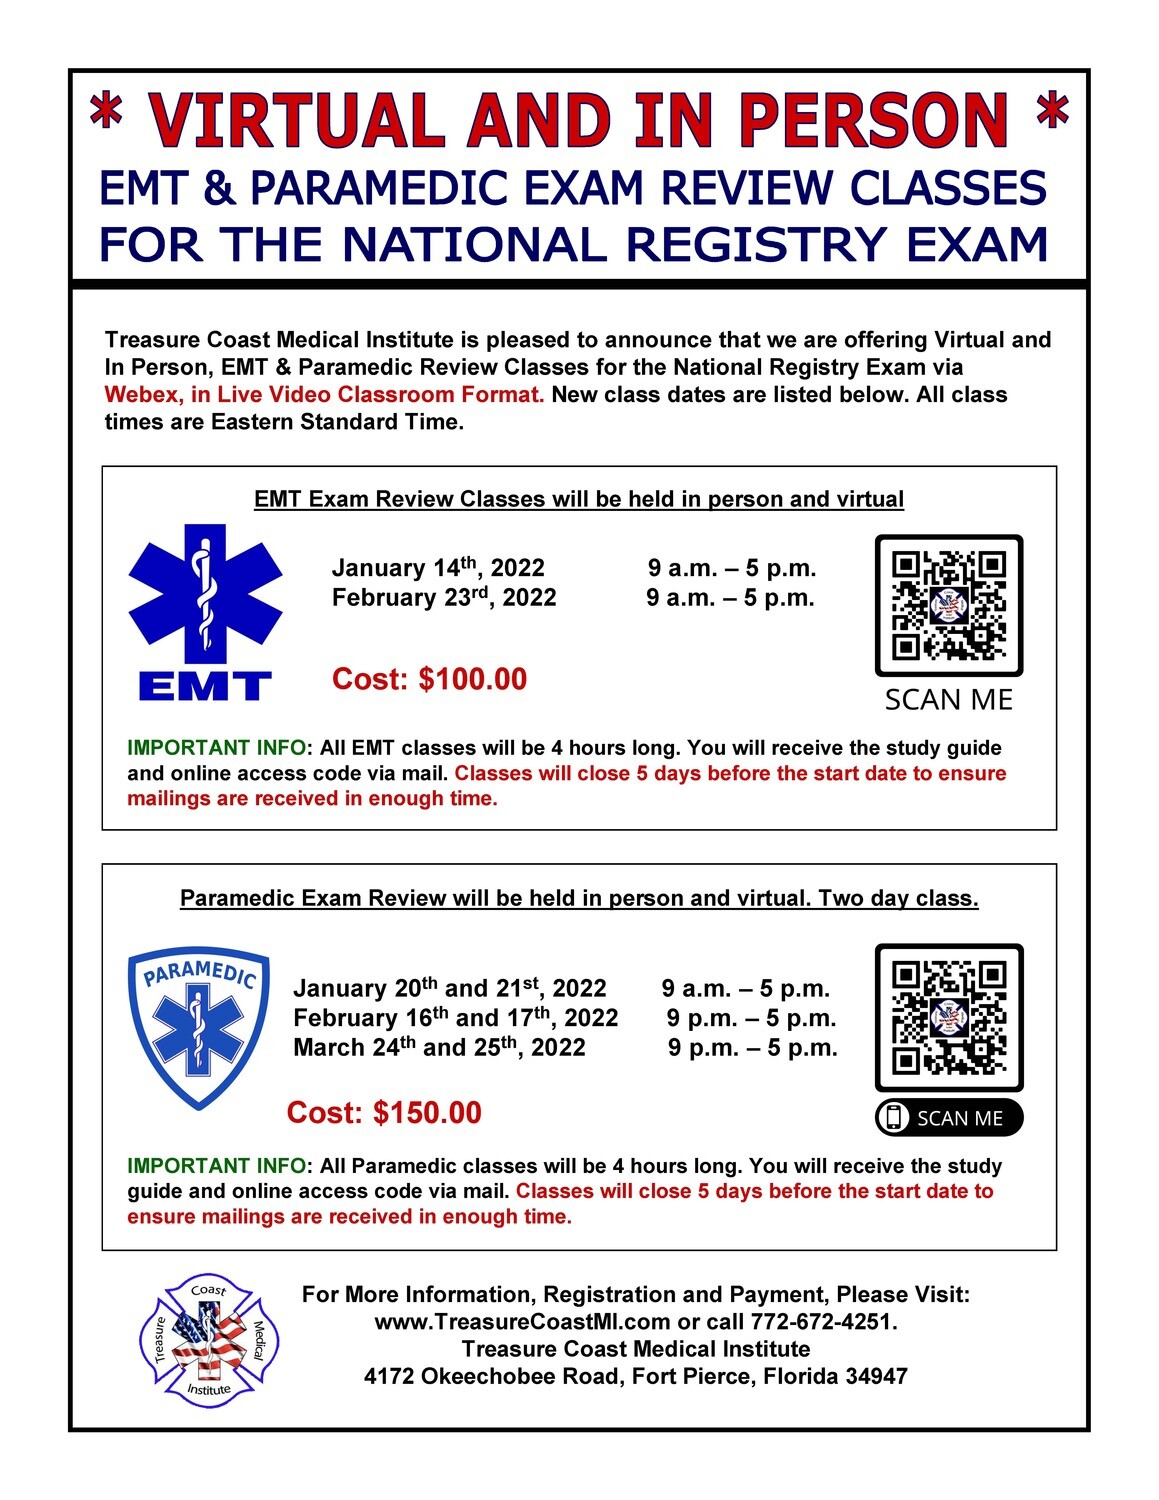 National Registry Paramedic January 20th and 21st Fort Pierce TCMI (IN PERSON)